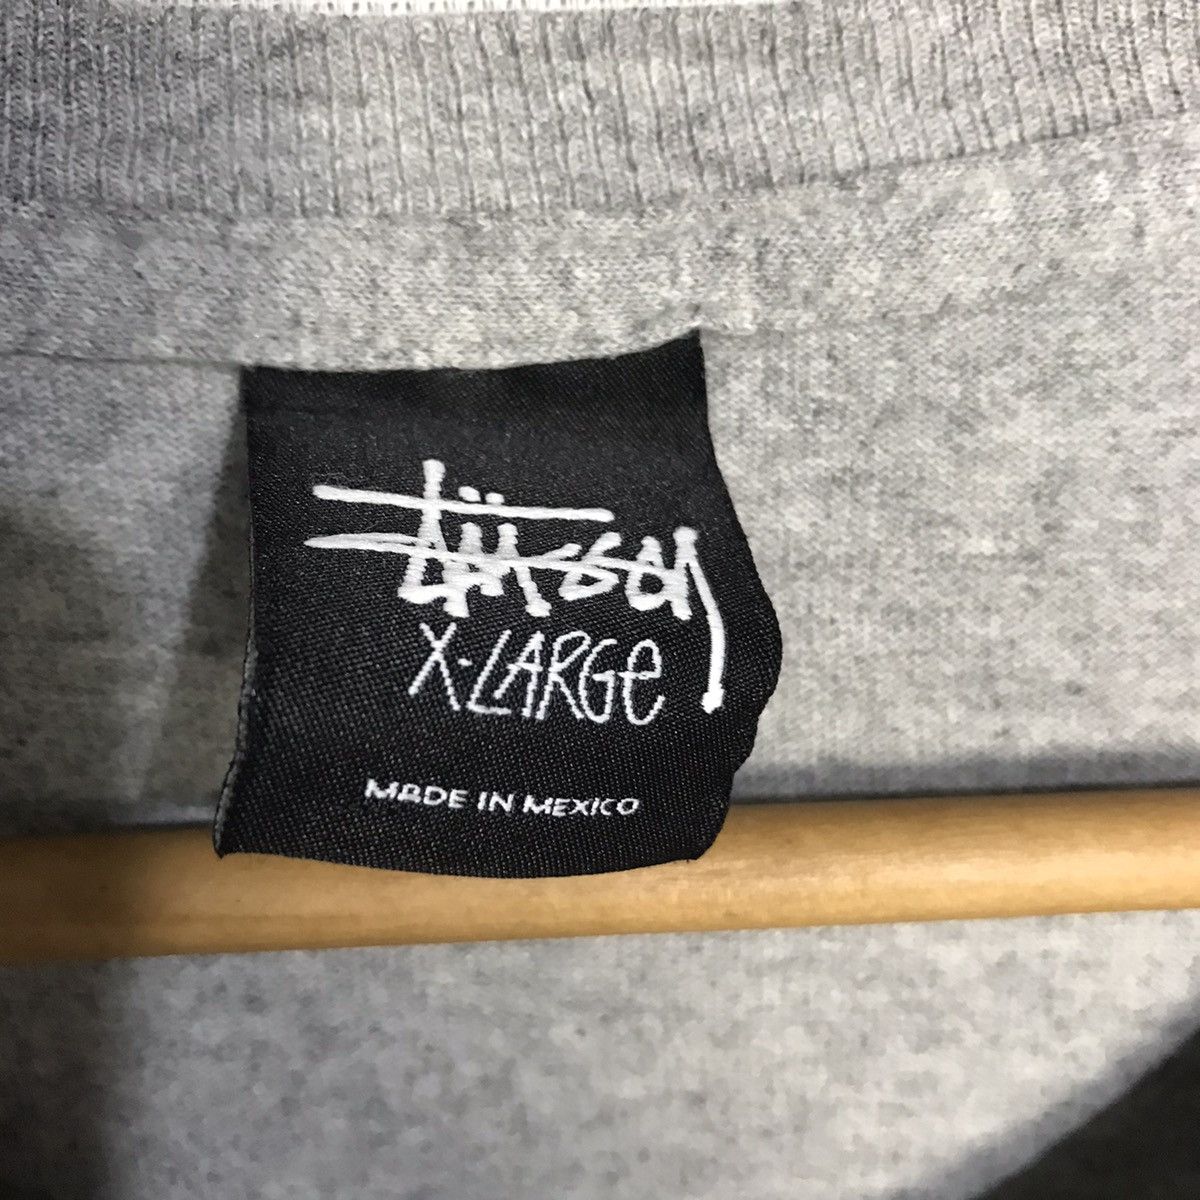 Vintage Stussy big spell tshirt made in mexico x large size - 3